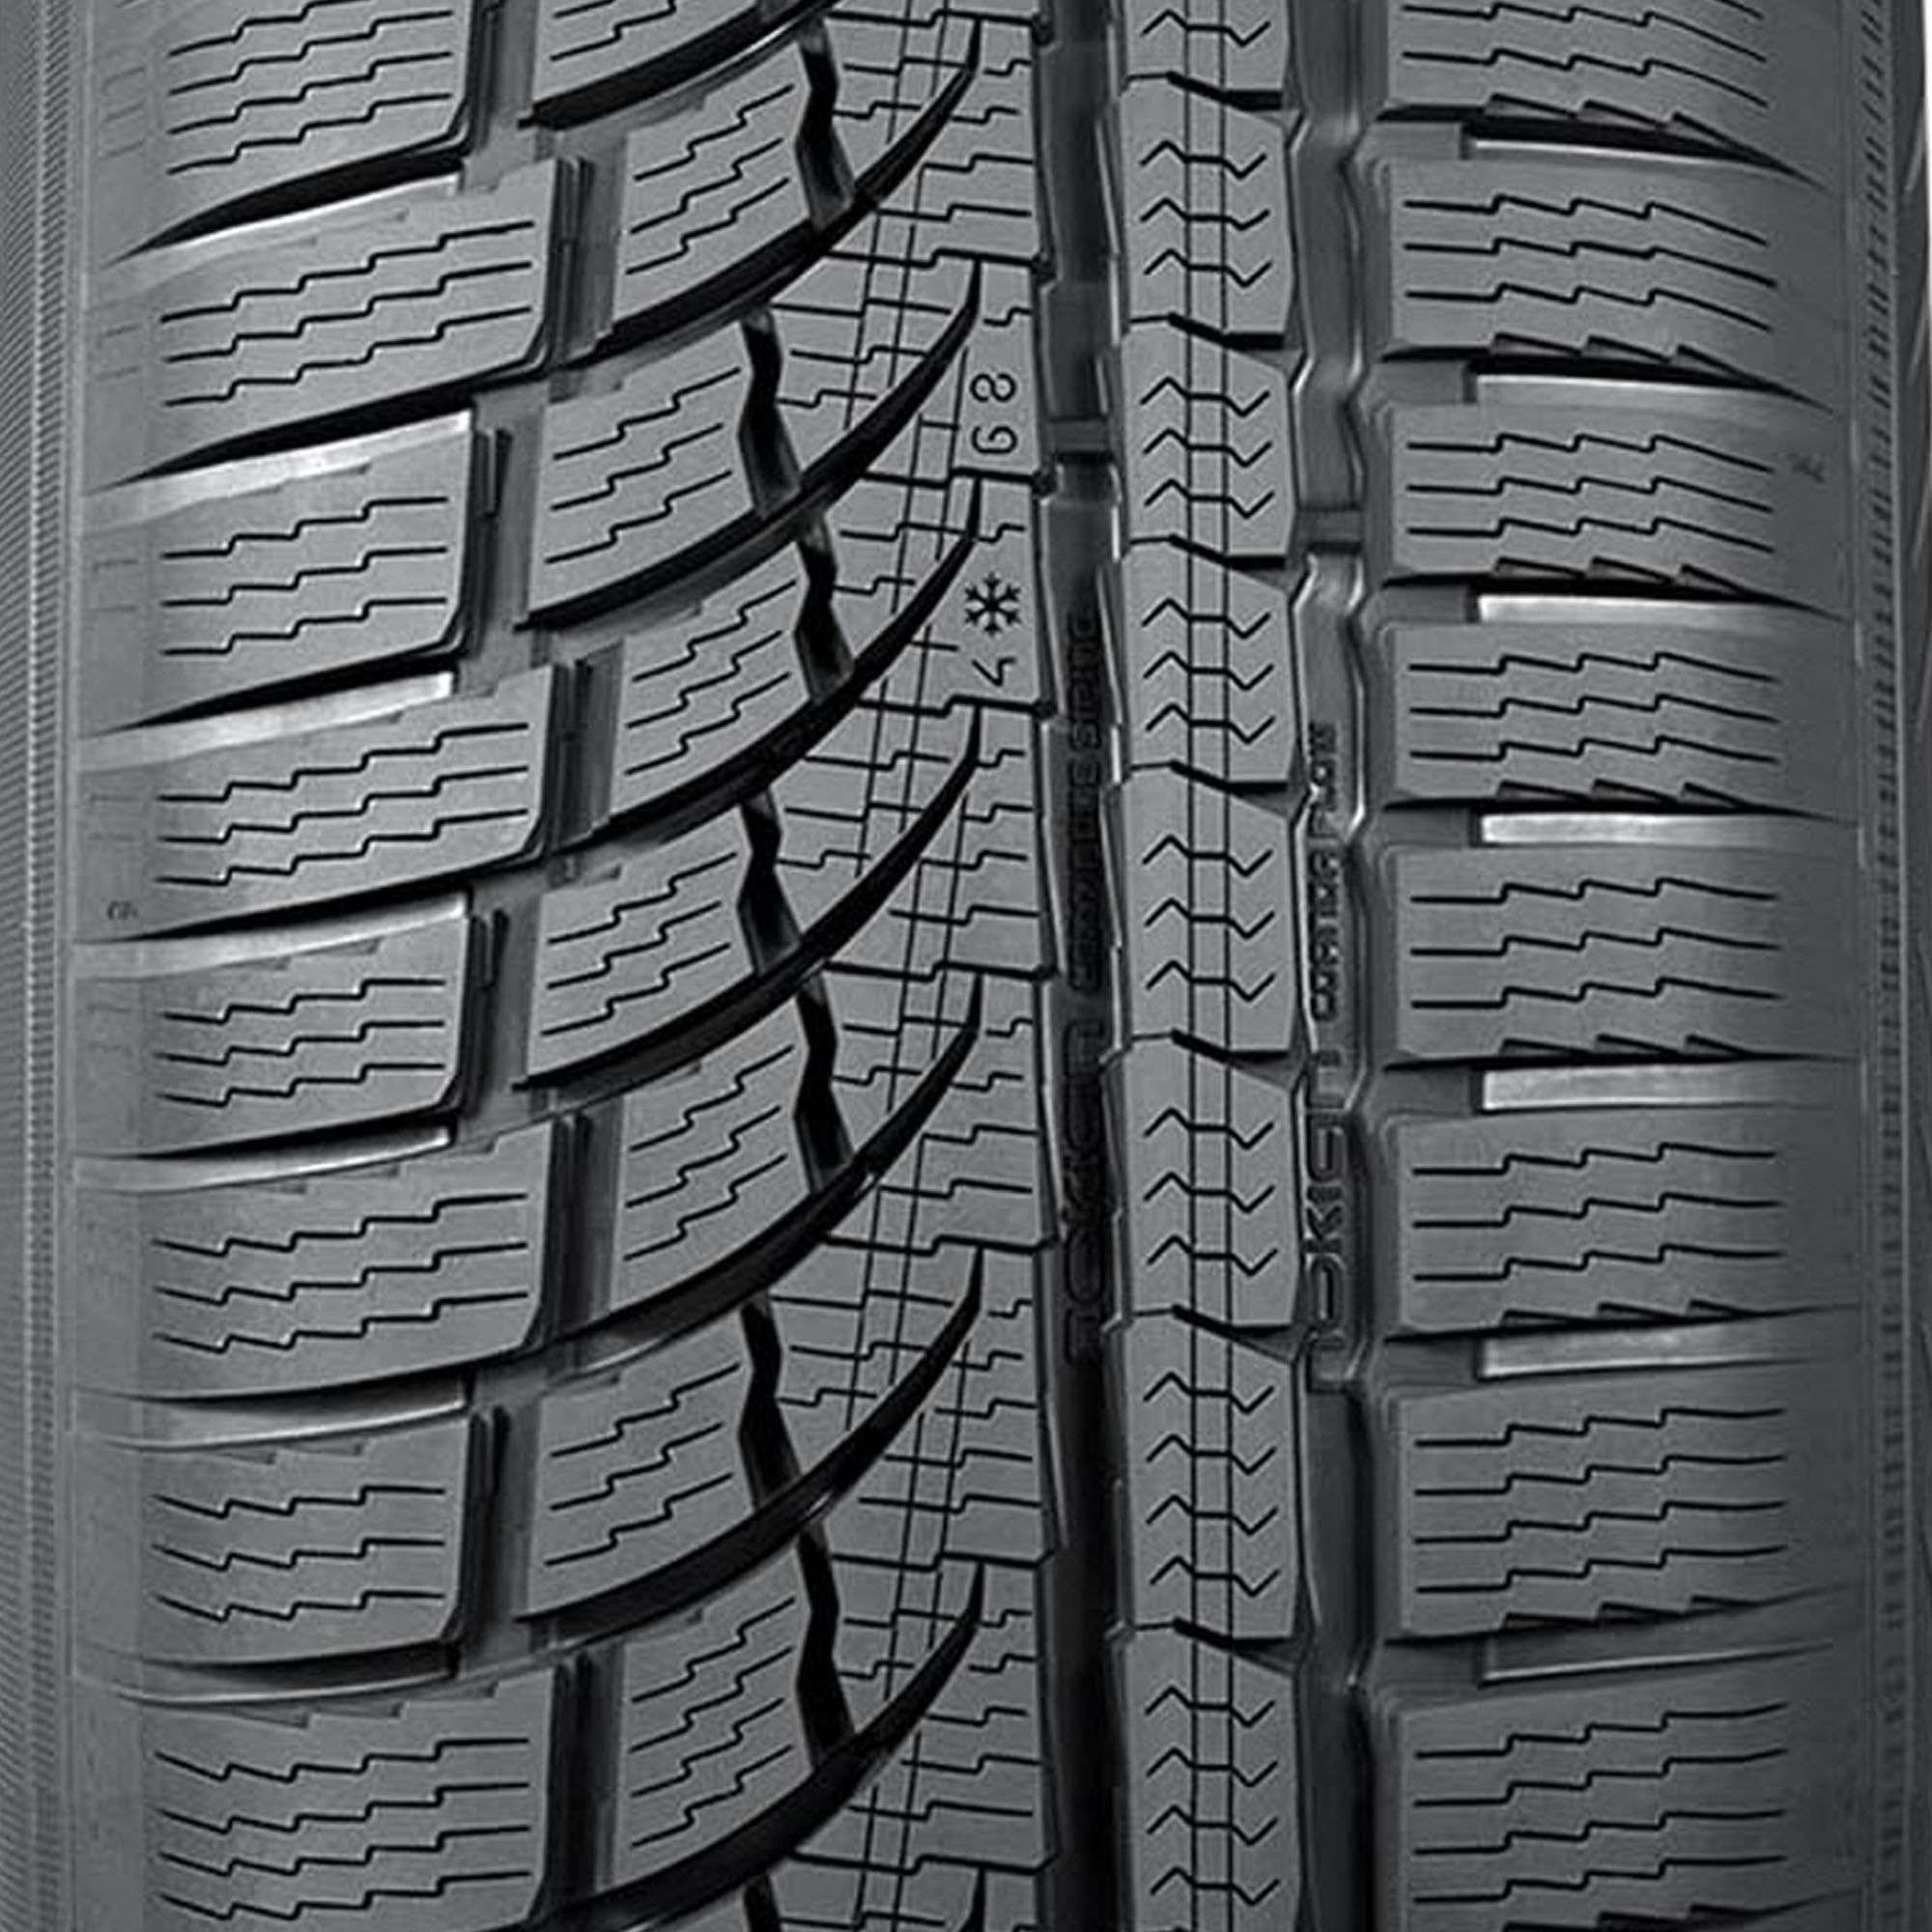 Nokian SUV/Crossover 114H XL Tire 265/60R18 WR SUV G4 All Weather